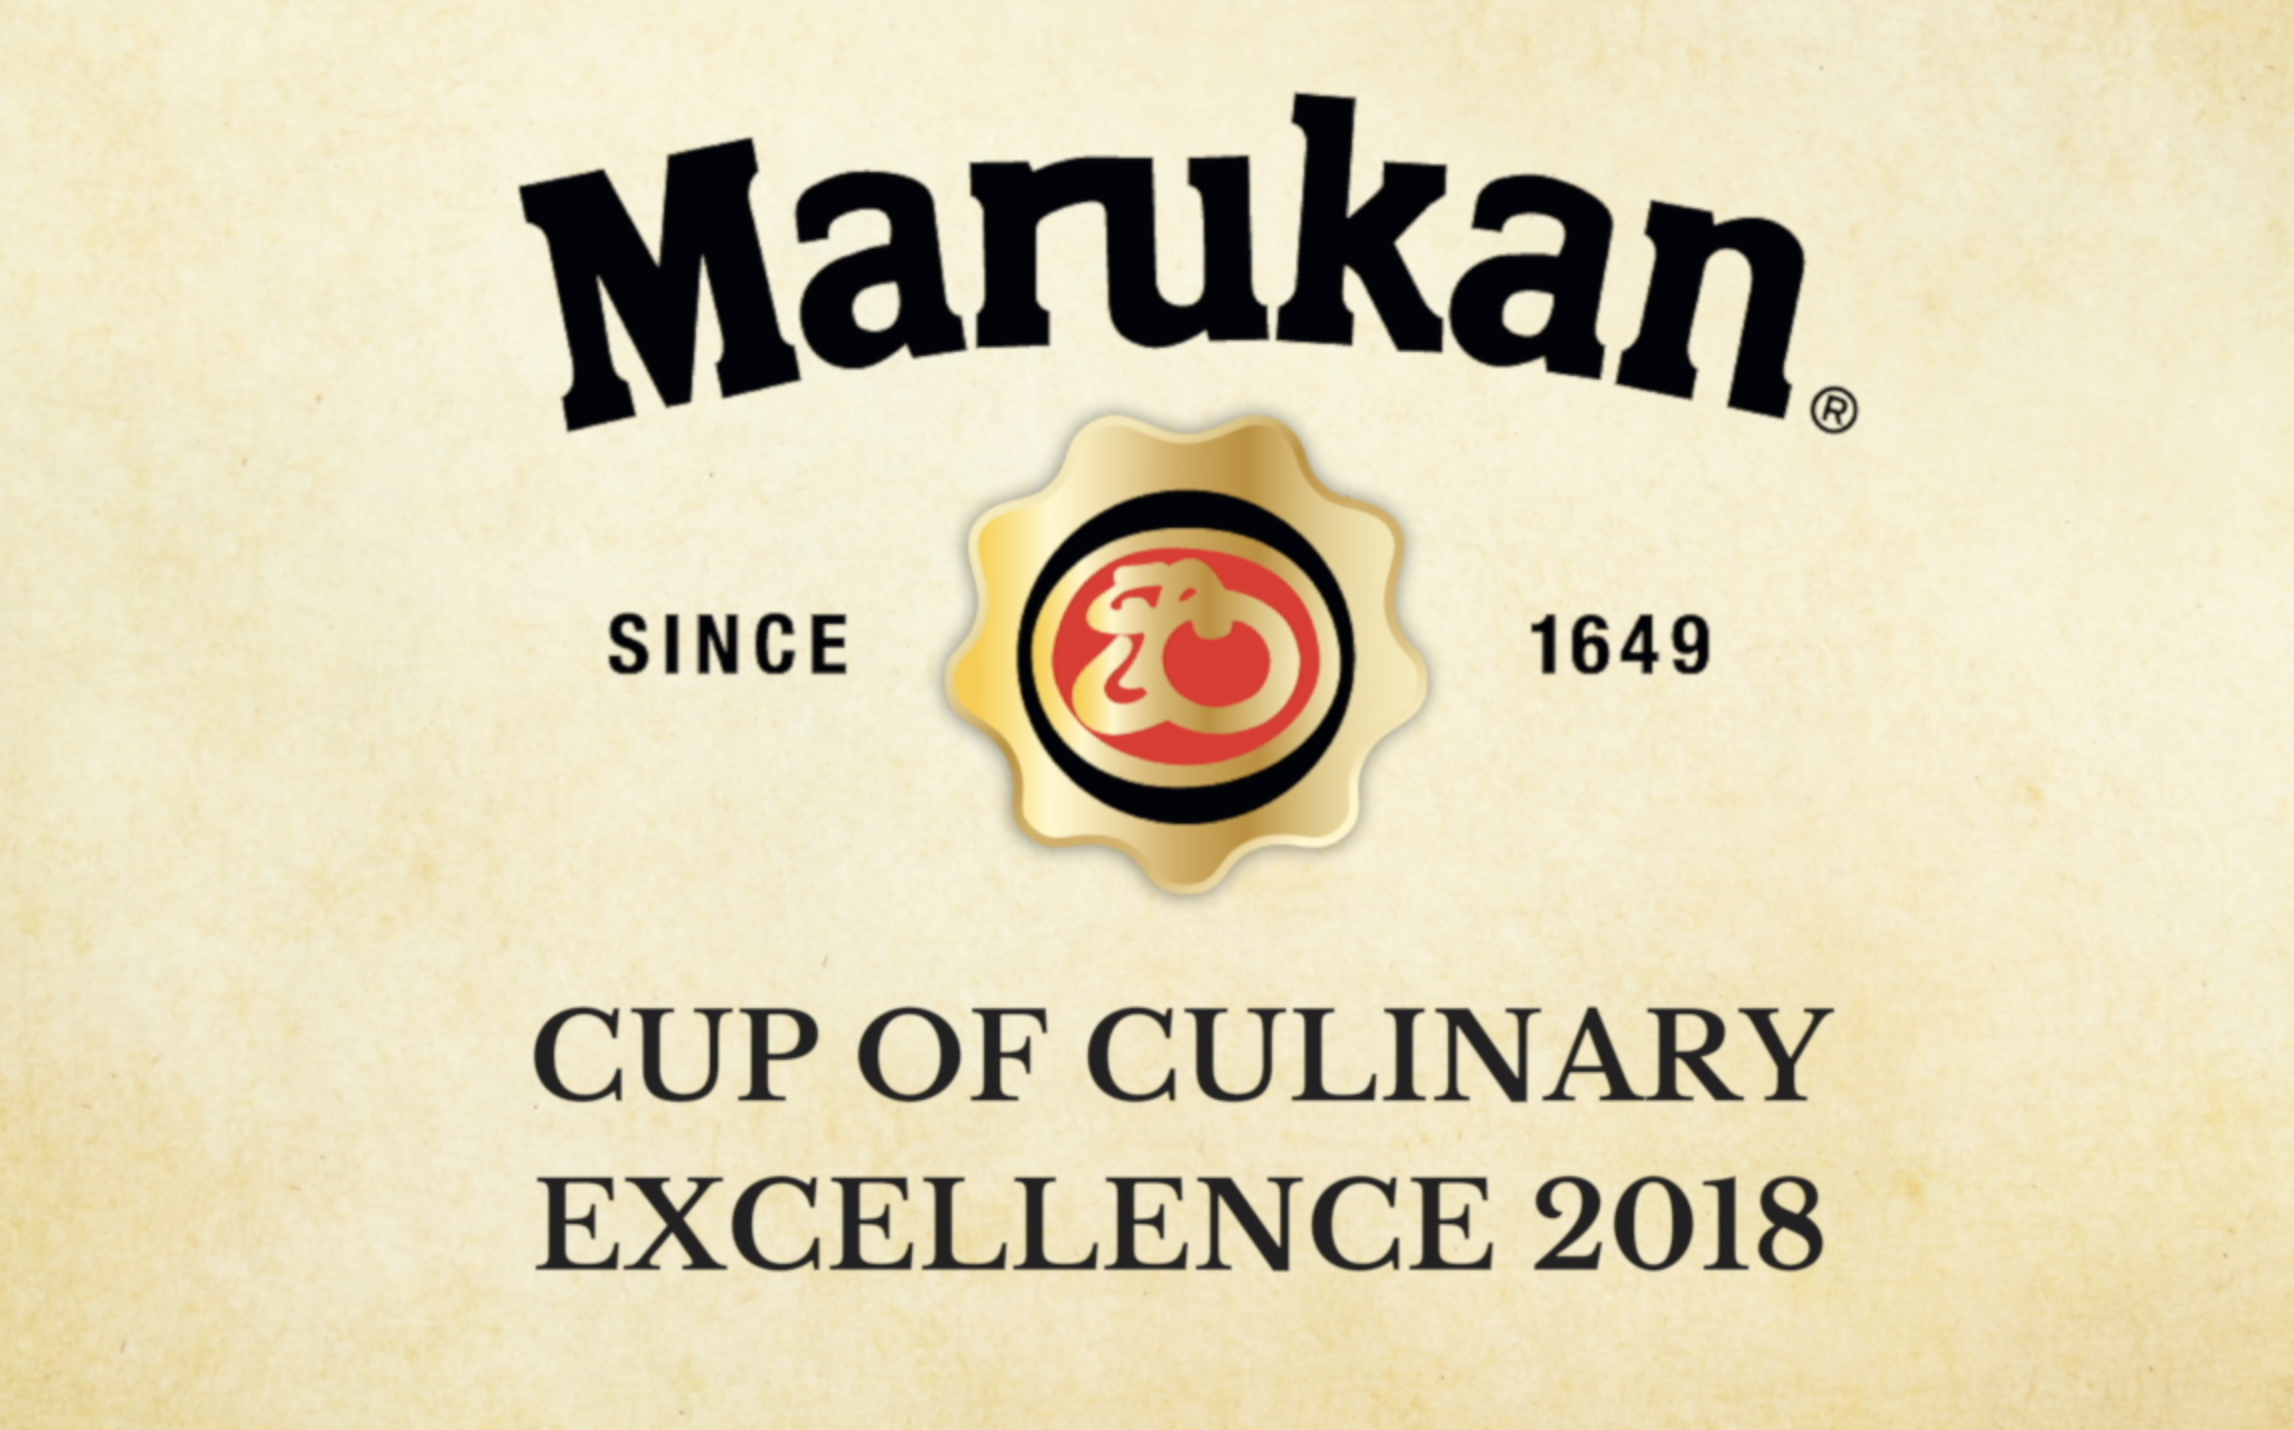 Marukan Cup of Culinary Excellence 2018